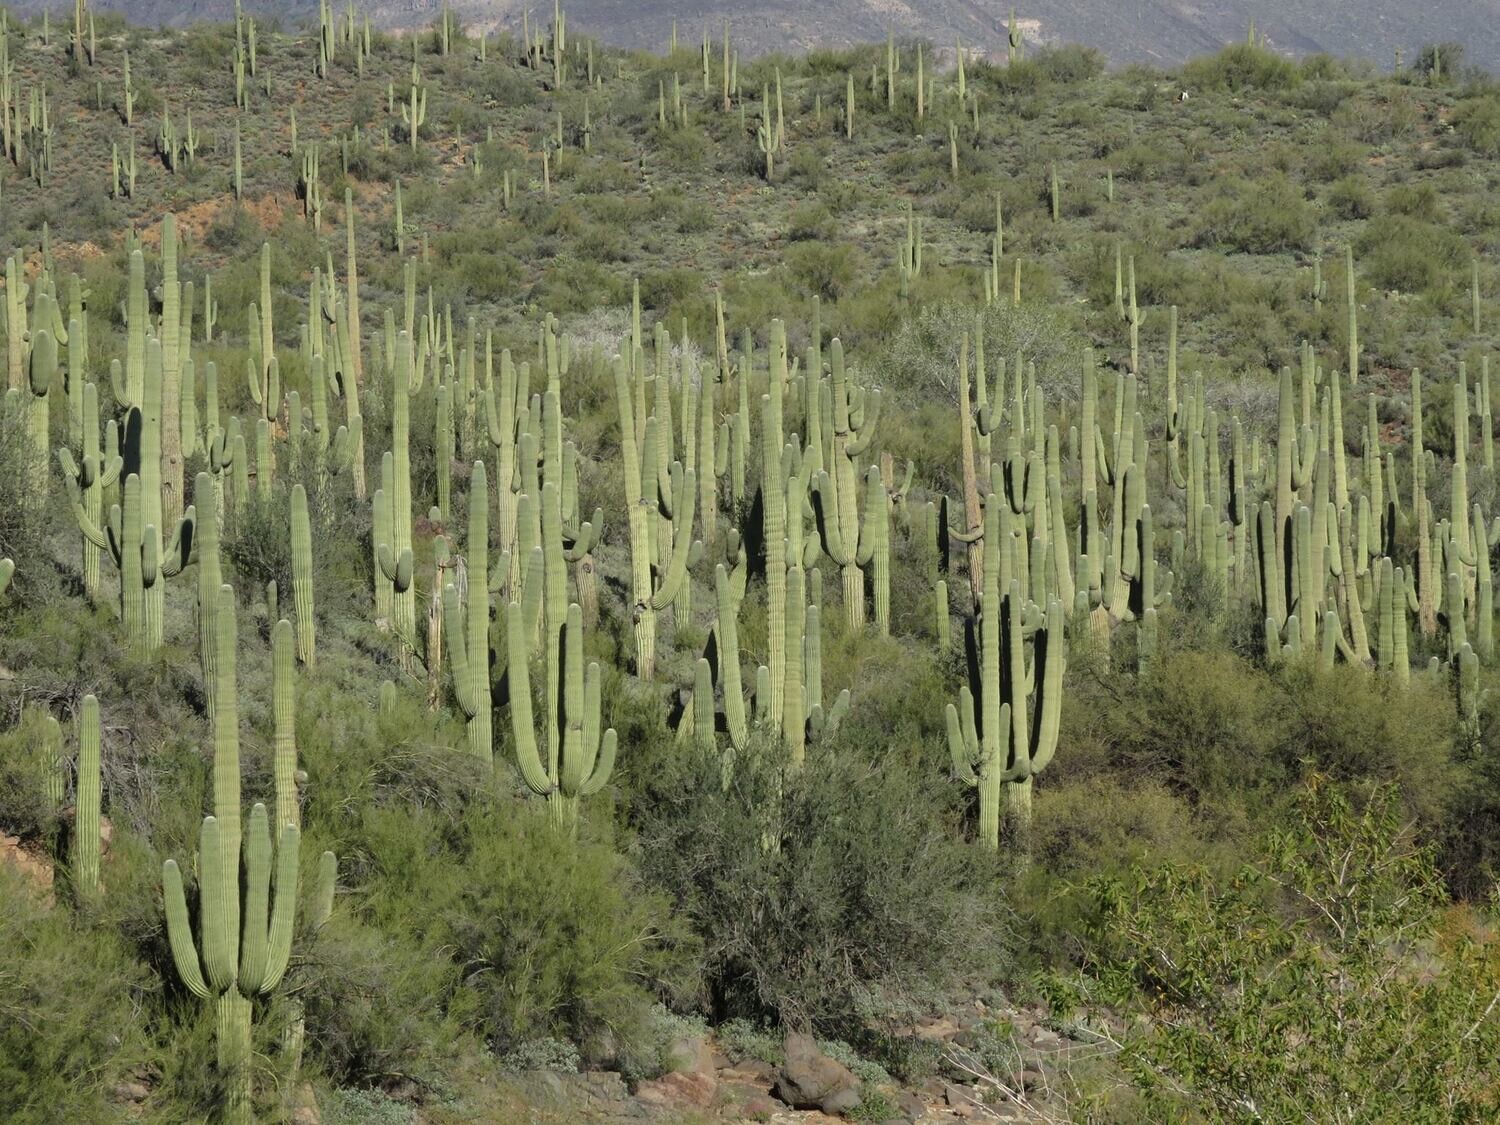 10/29 - 8:30 am - Spur Cross Ranch (Cave Creek) Guided Hike